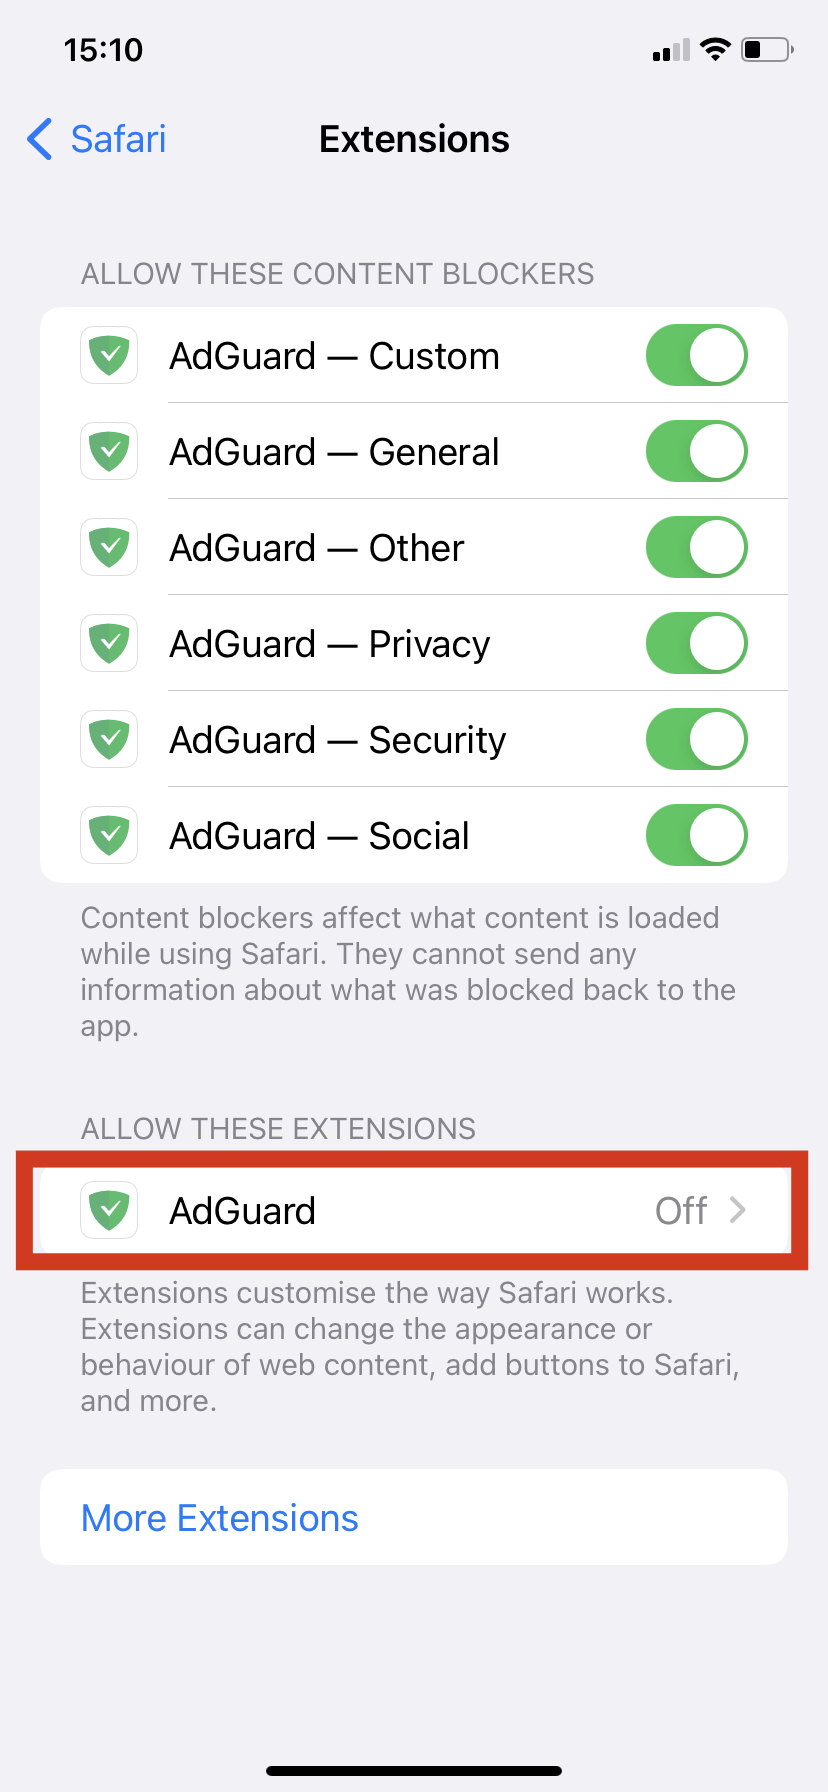 Select "AdGuard" in ALLOW THESE EXTENSIONS section *mobile_border